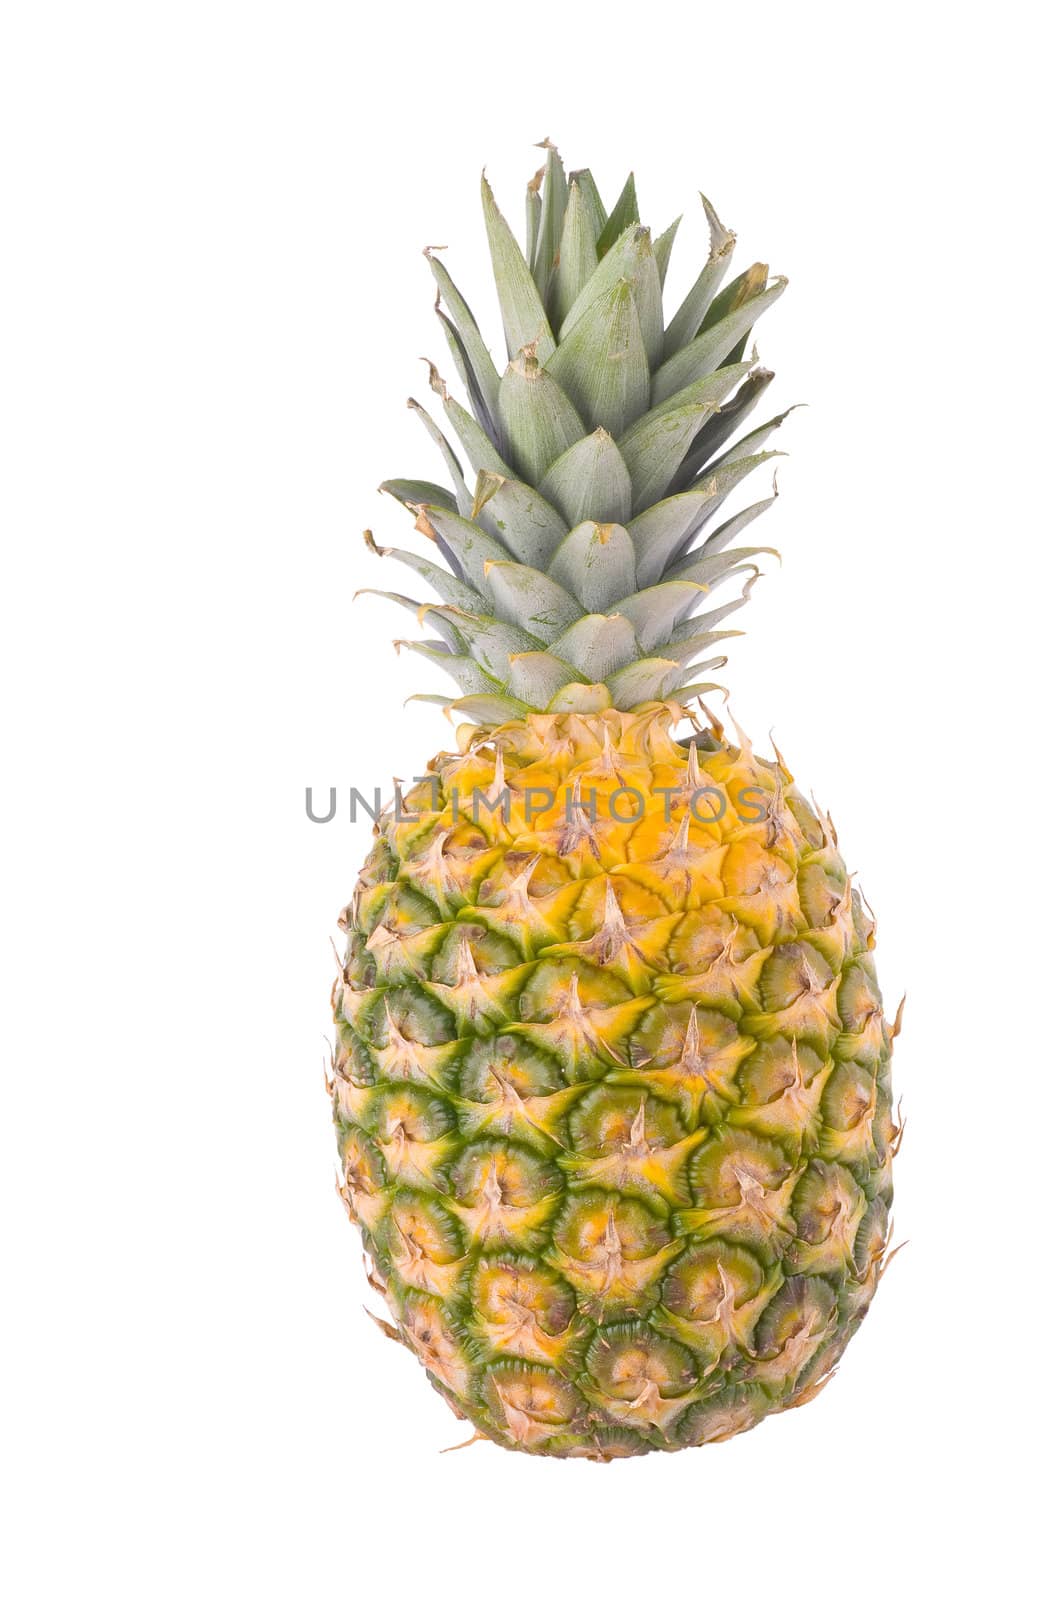 Nice and fresh pineapple on white